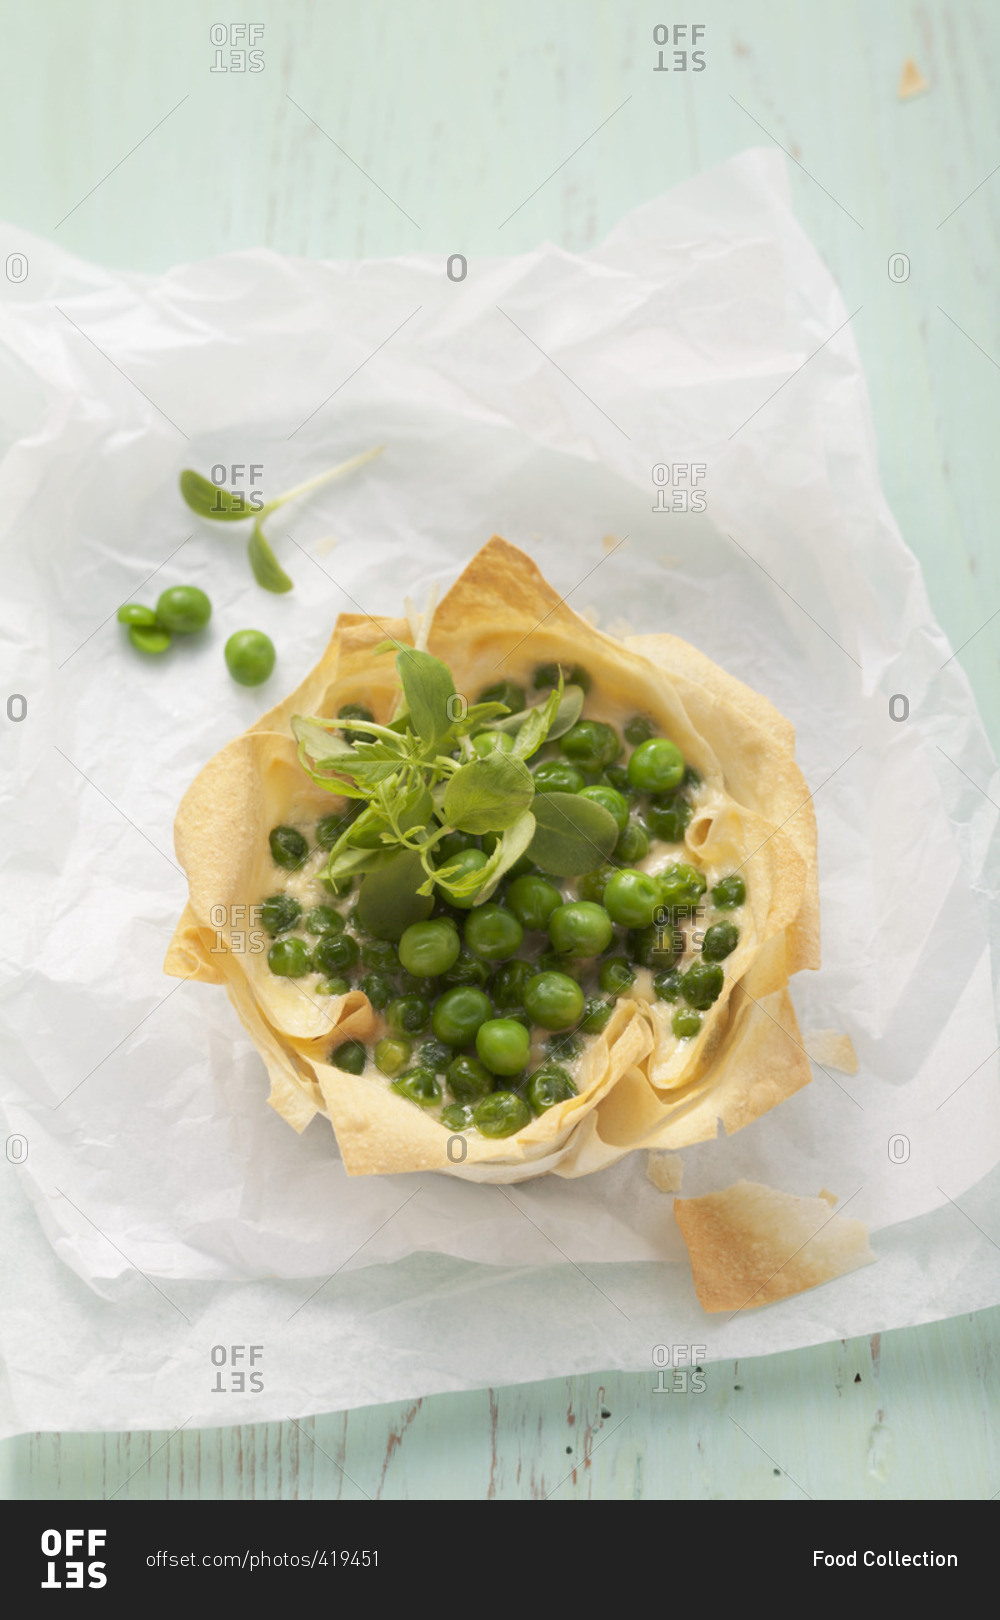 A puff pastry dish filled with peas